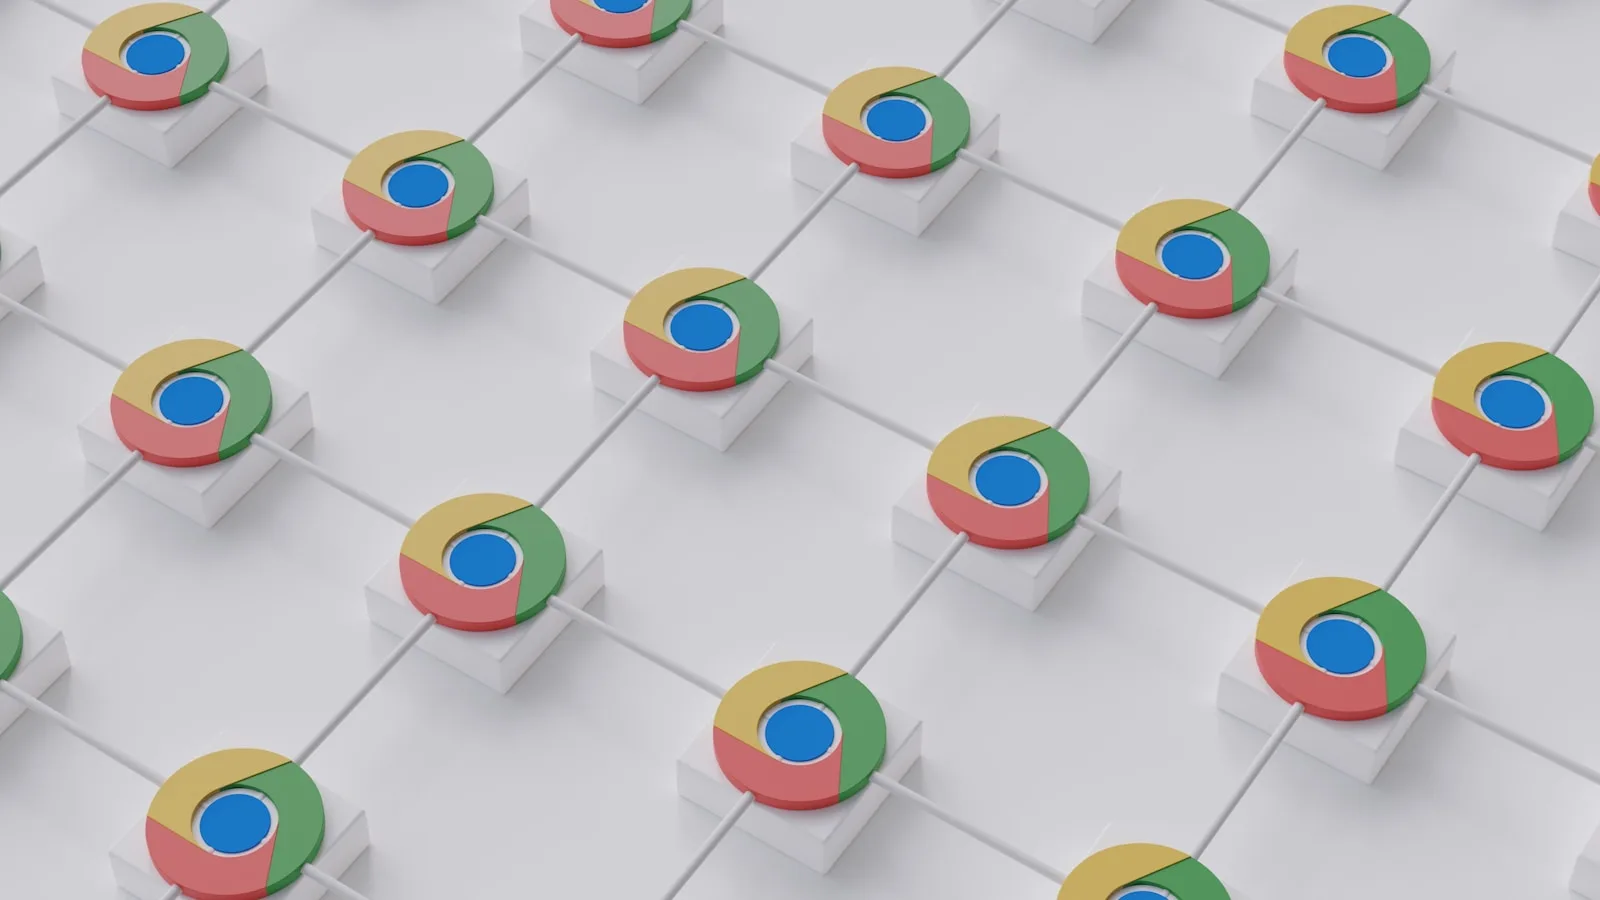 Restoring the Side Panel button in Google Chrome